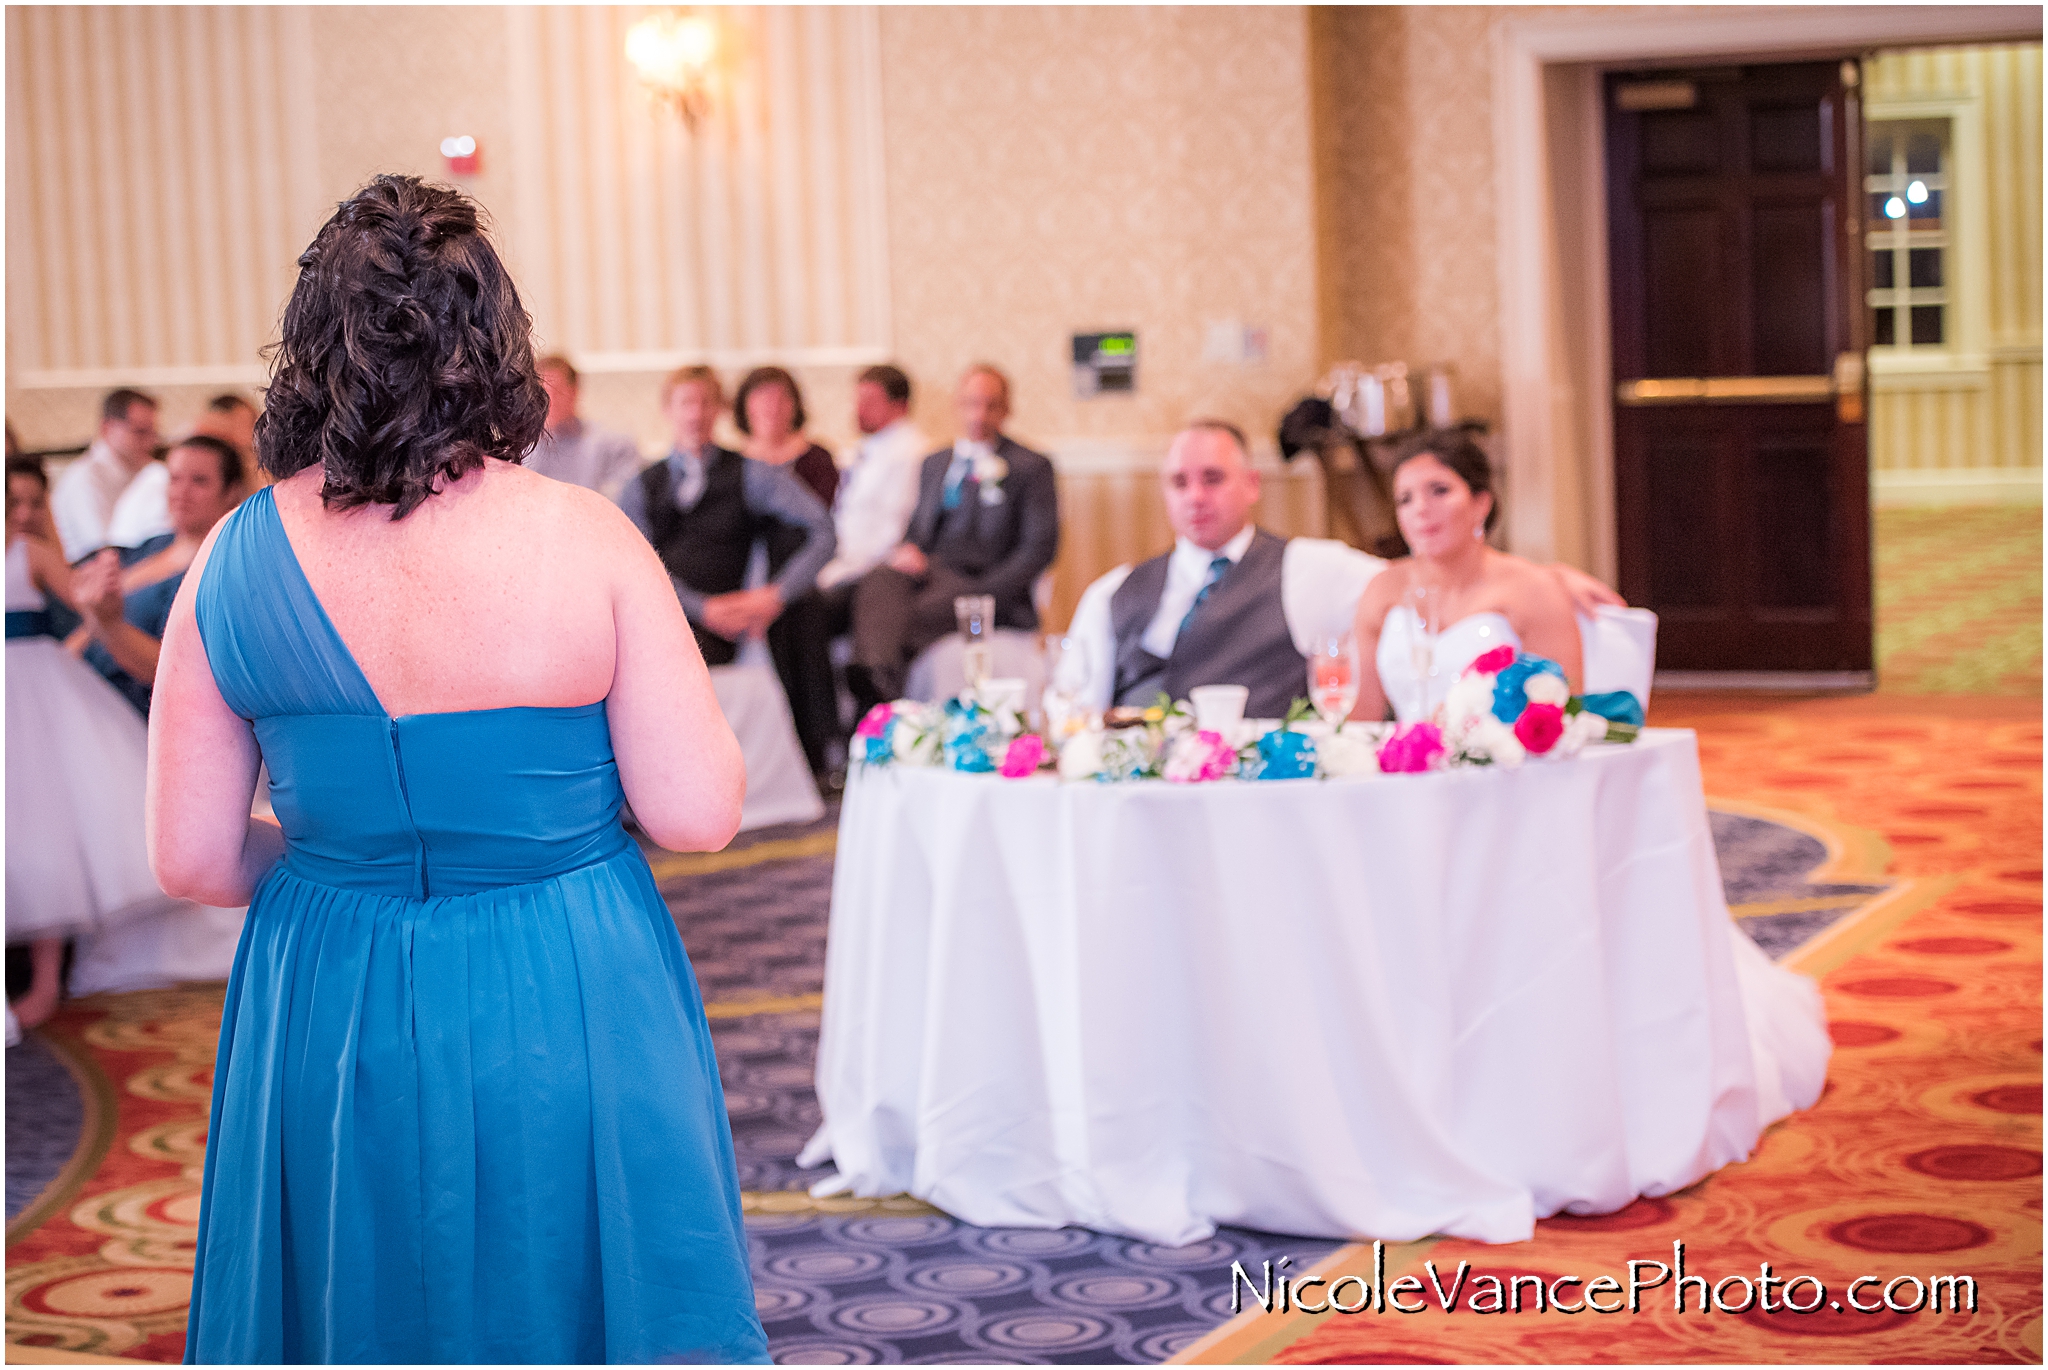 The maid of honor makes a toast at the reception at the Virginia Crossings.